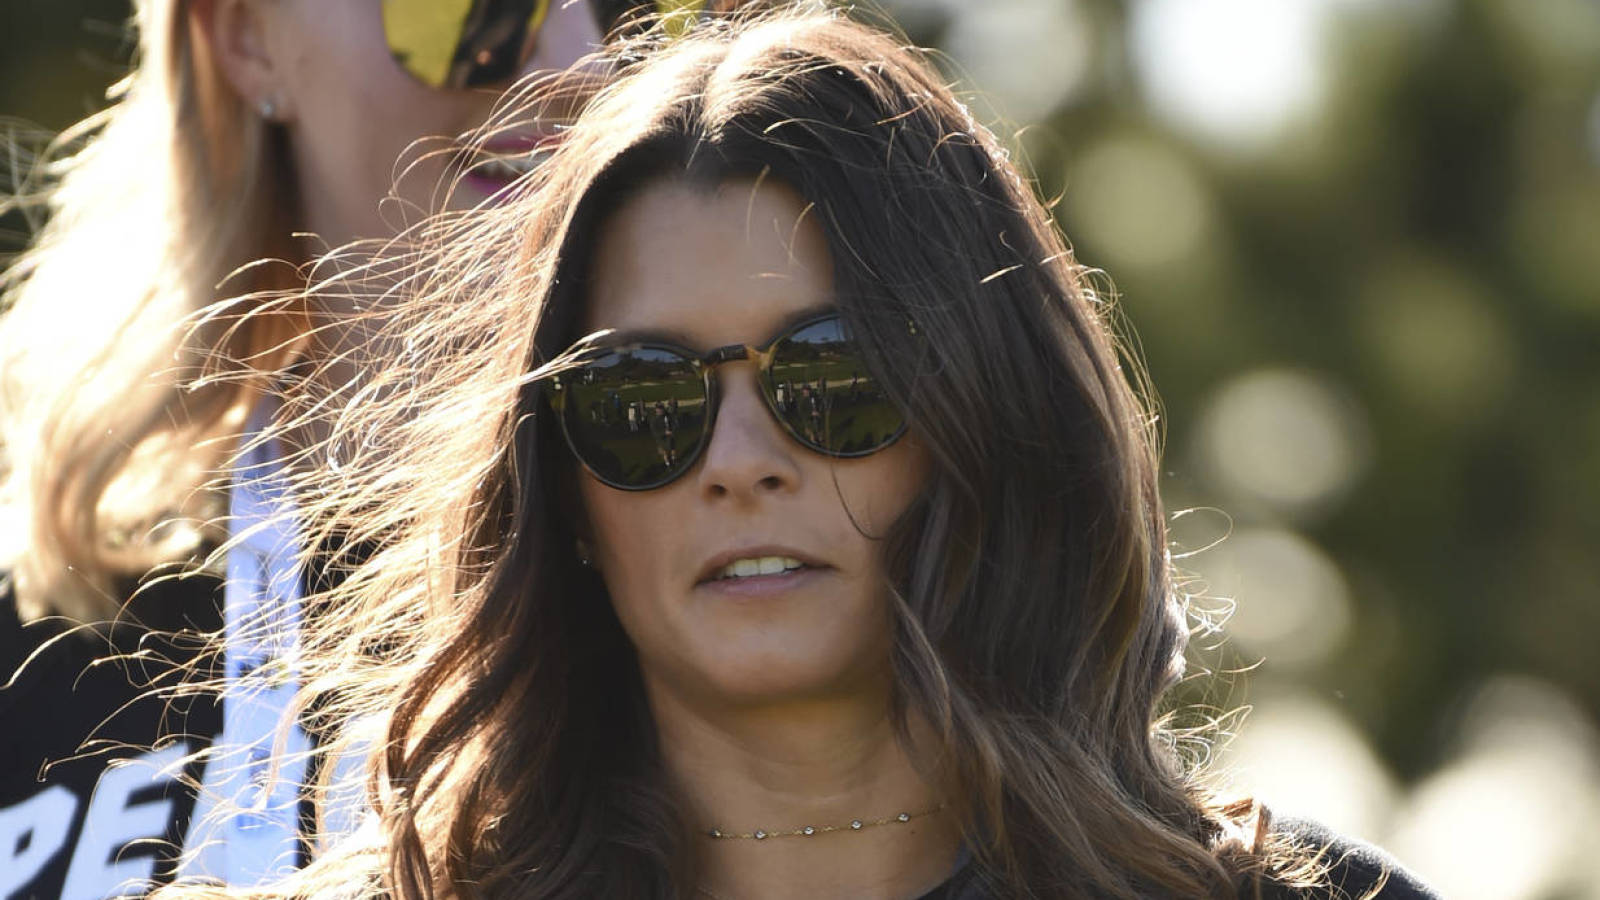 Details revealed on how Danica Patrick and boyfriend Carter Comstock met